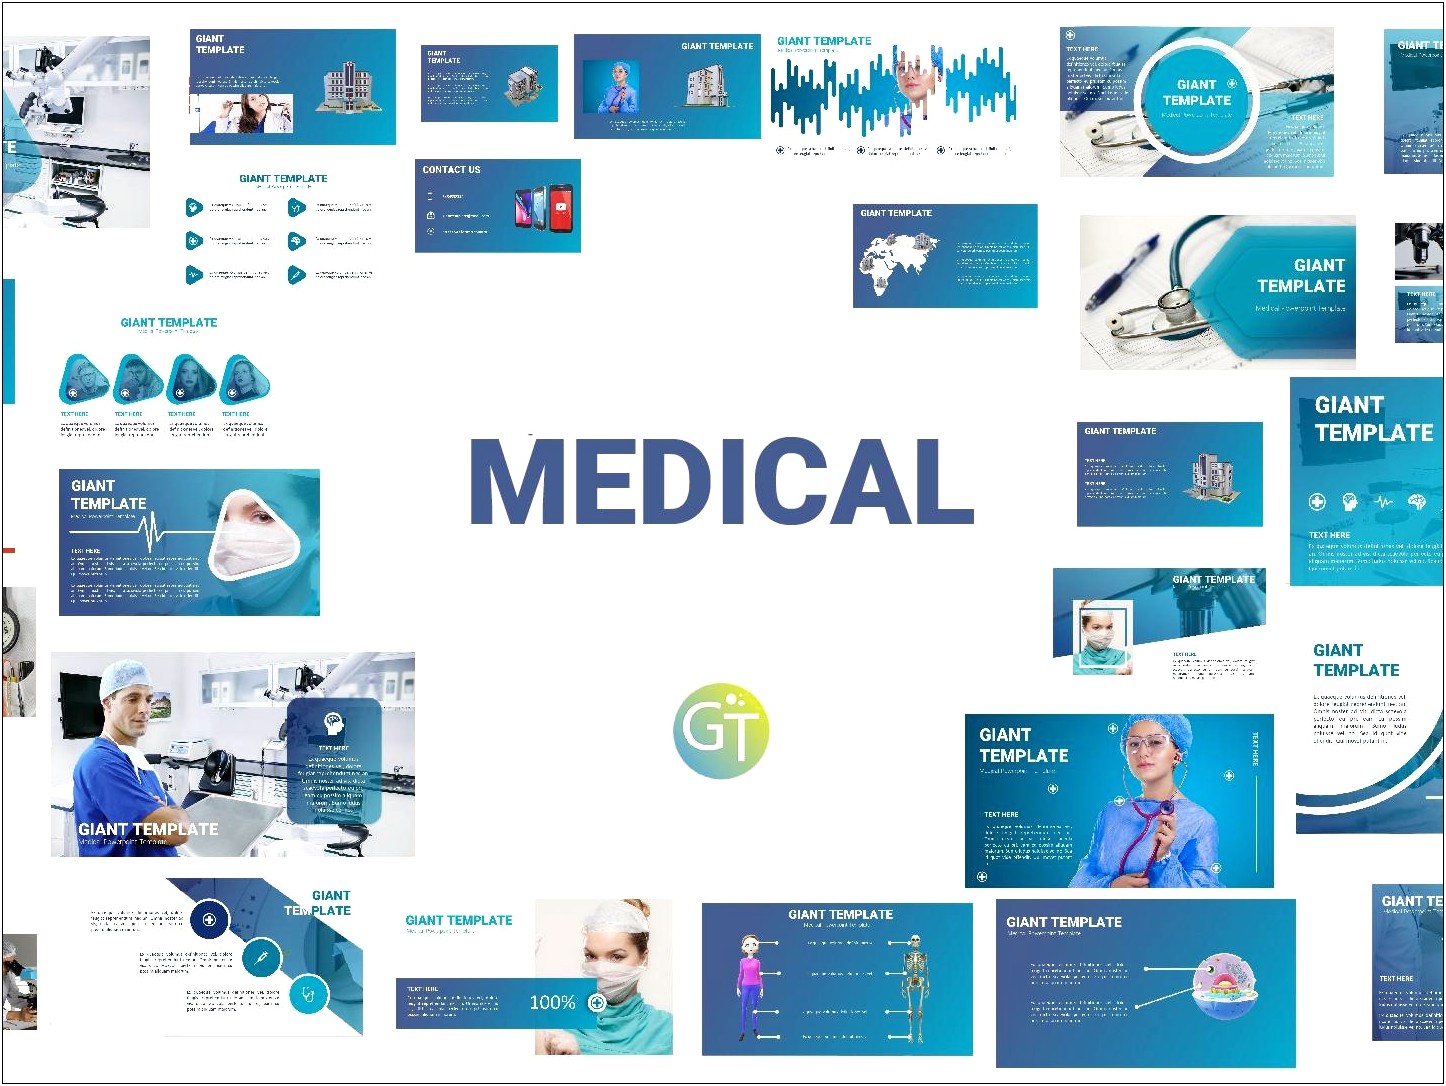 animated-medical-ppt-templates-free-download-templates-resume-designs-amwvr4xj0m